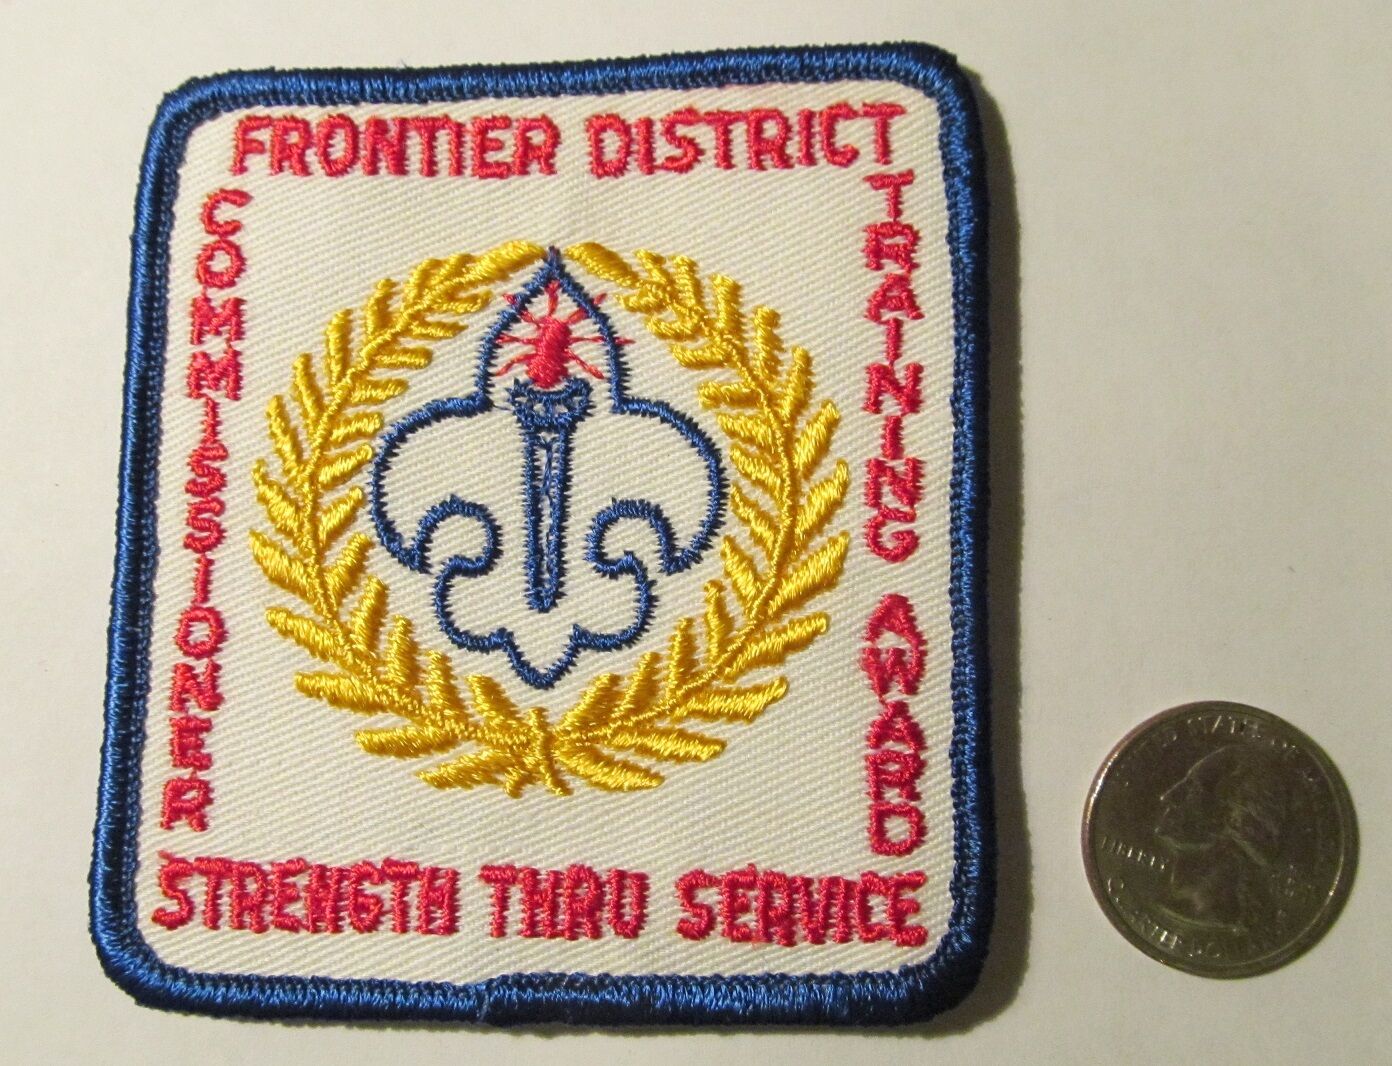 Patch - BOY SCOUTS BSA  - FRONTIER DISTRICT Award STRENGTH Service /////////////